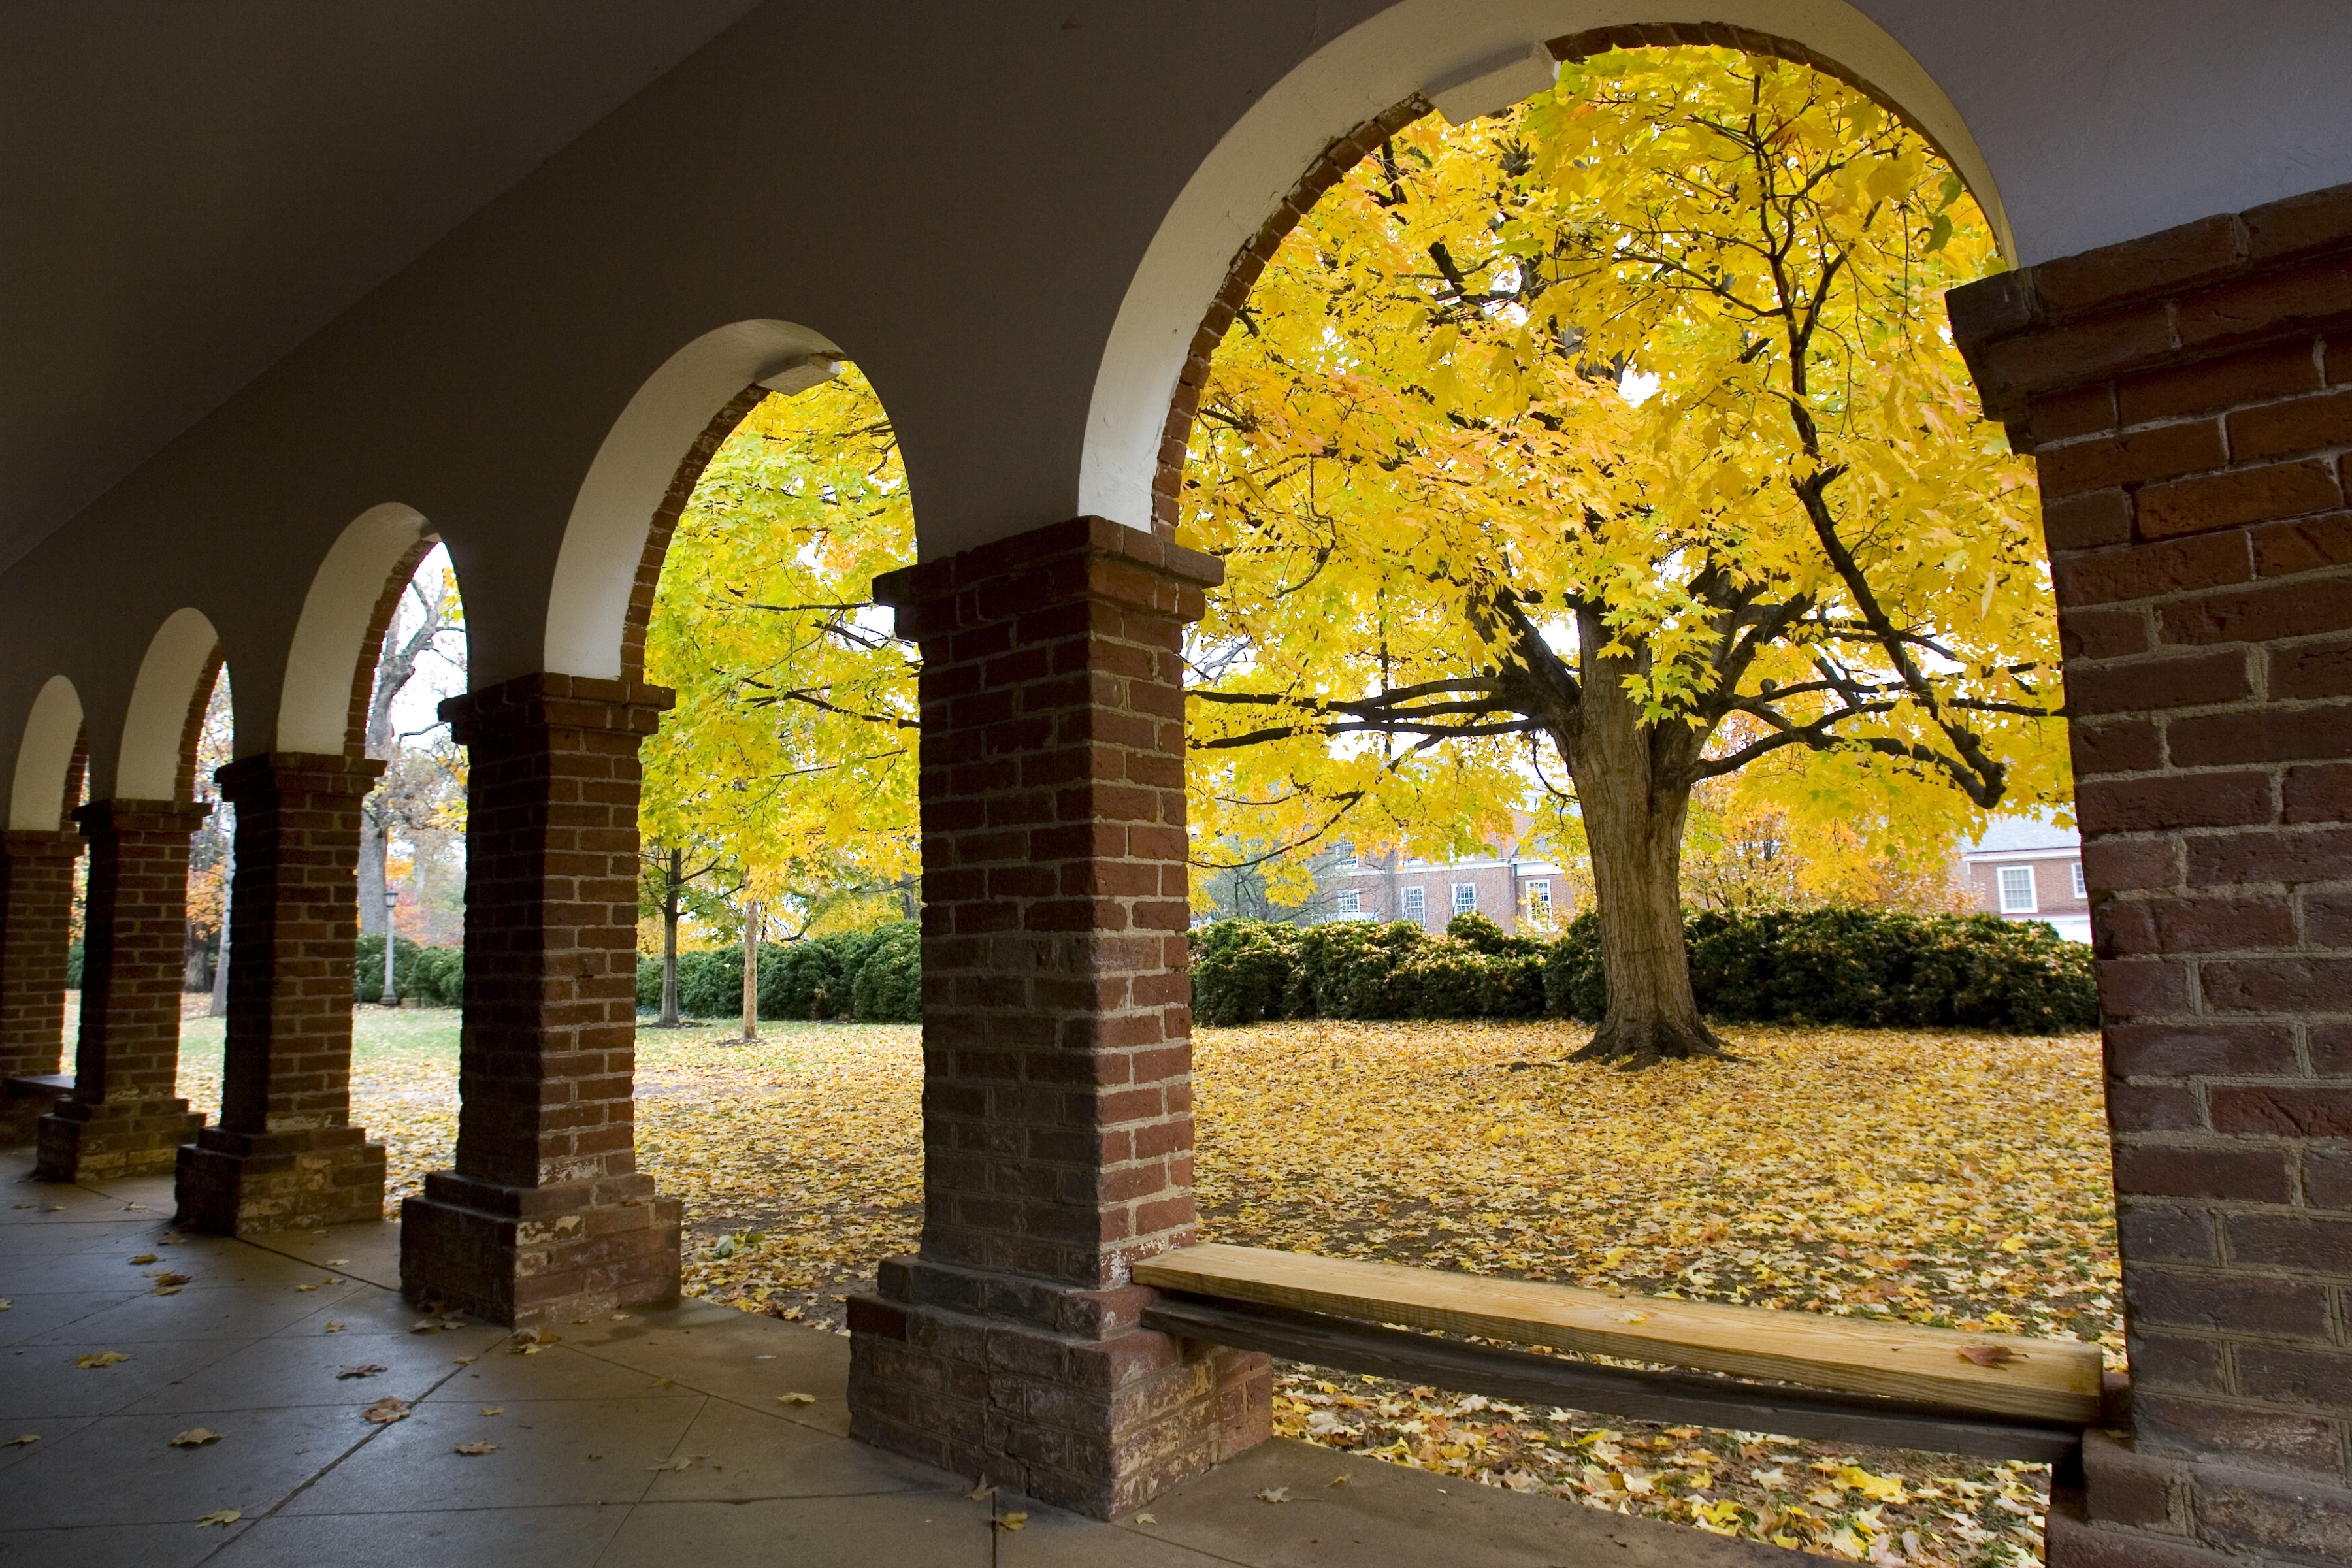 Looking through the Arches of a brick building looking at a big yellow oak tree as its leaves fall on the ground